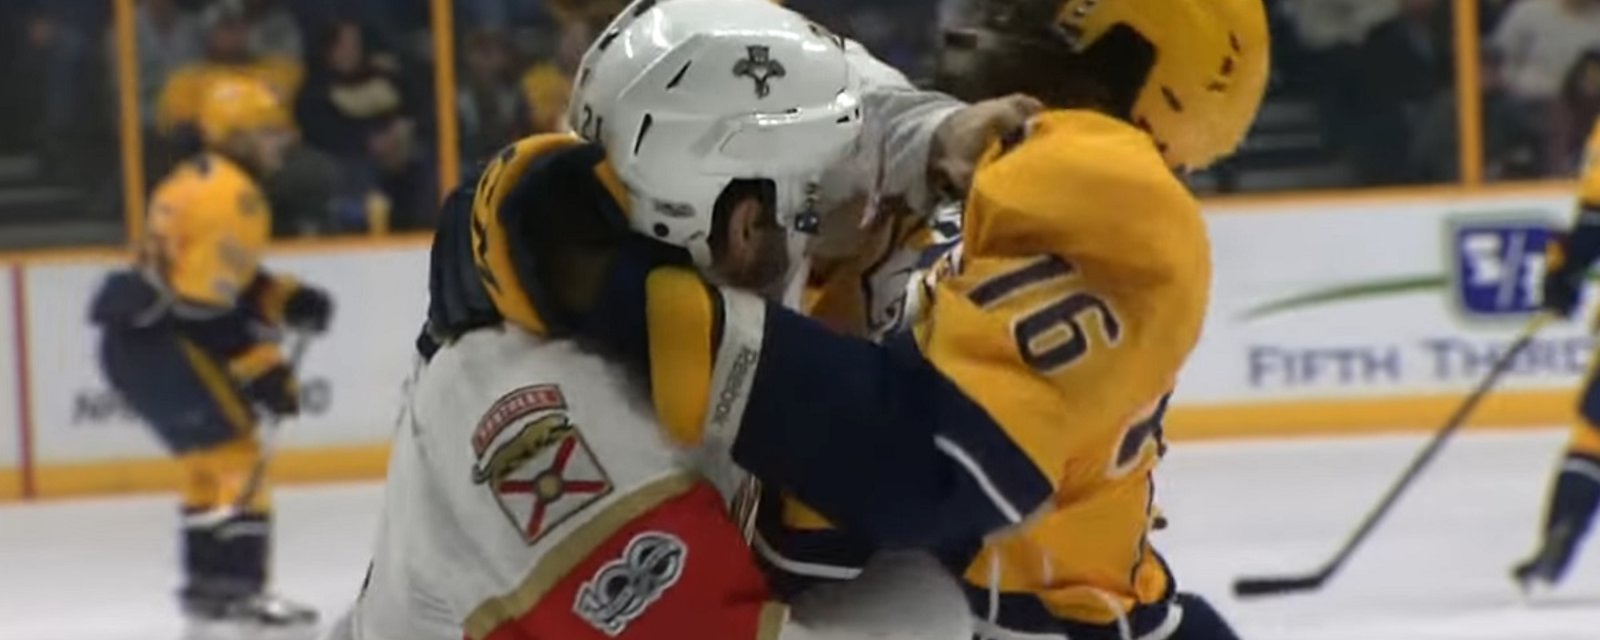 Video: P.K. Subban appears to punch referee who tries to break up the fight.